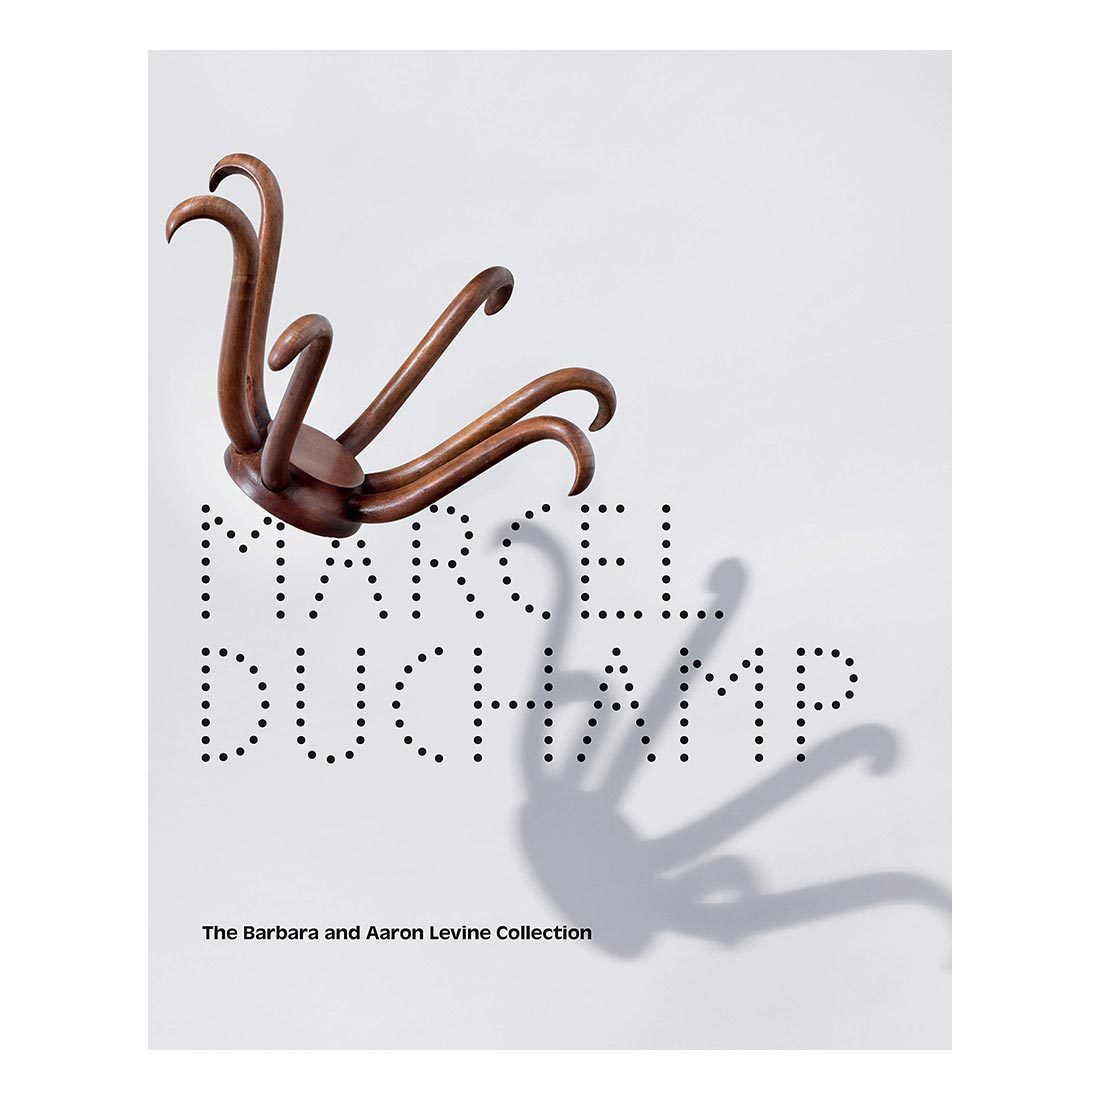 Marcel Duchamp: The Barbara and Aaron Levine Collection